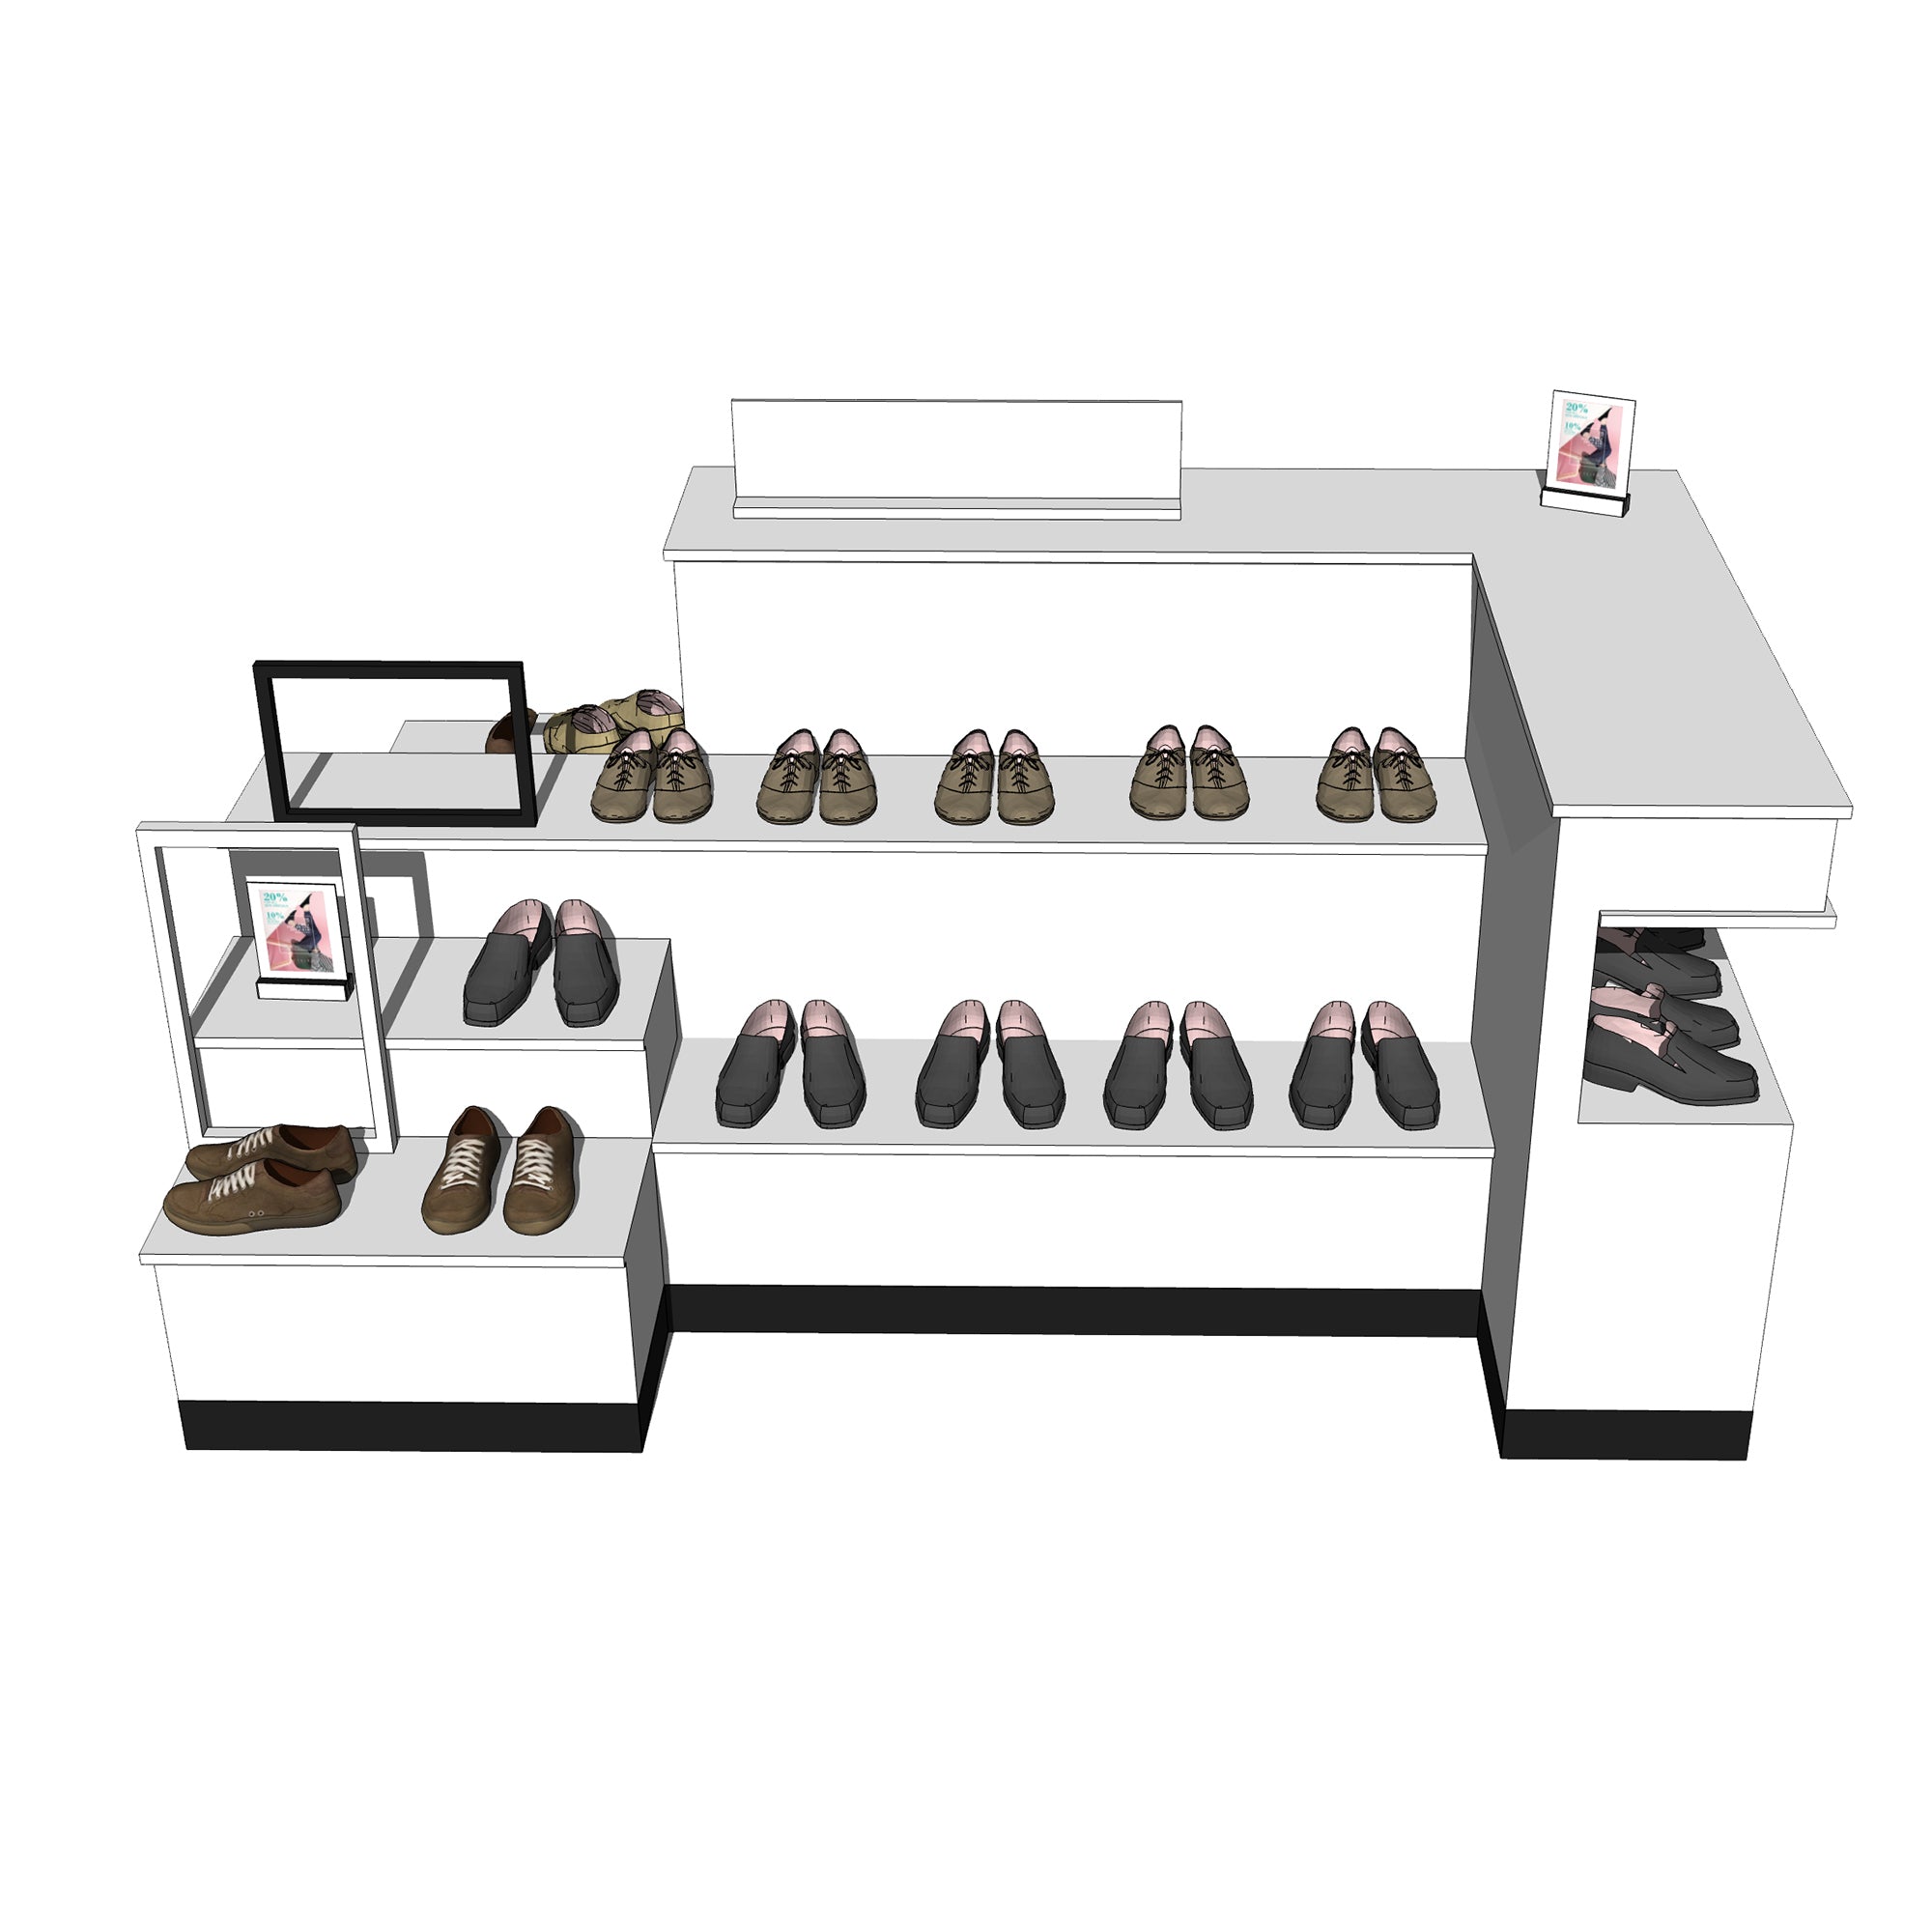 Customizable Wood Shoe Display Table for Footwear Store Fixtures